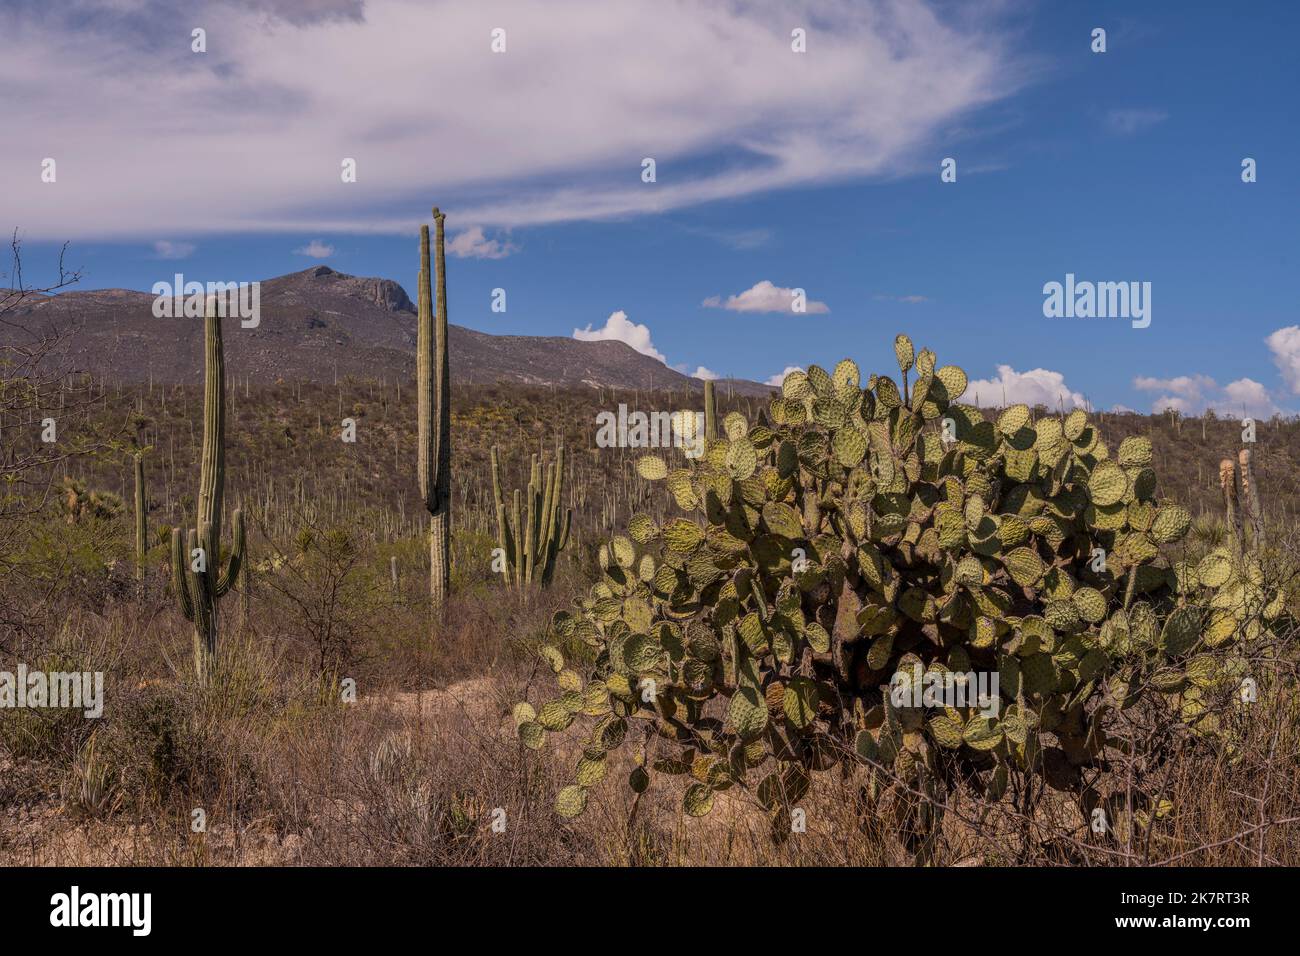 Landscape with cacti, including Opuntia streptacantha (Nopal), at the Tehuacan-Cuicatlan Biosphere Reserve (UNESCO World Heritage Site) near the villa Stock Photo